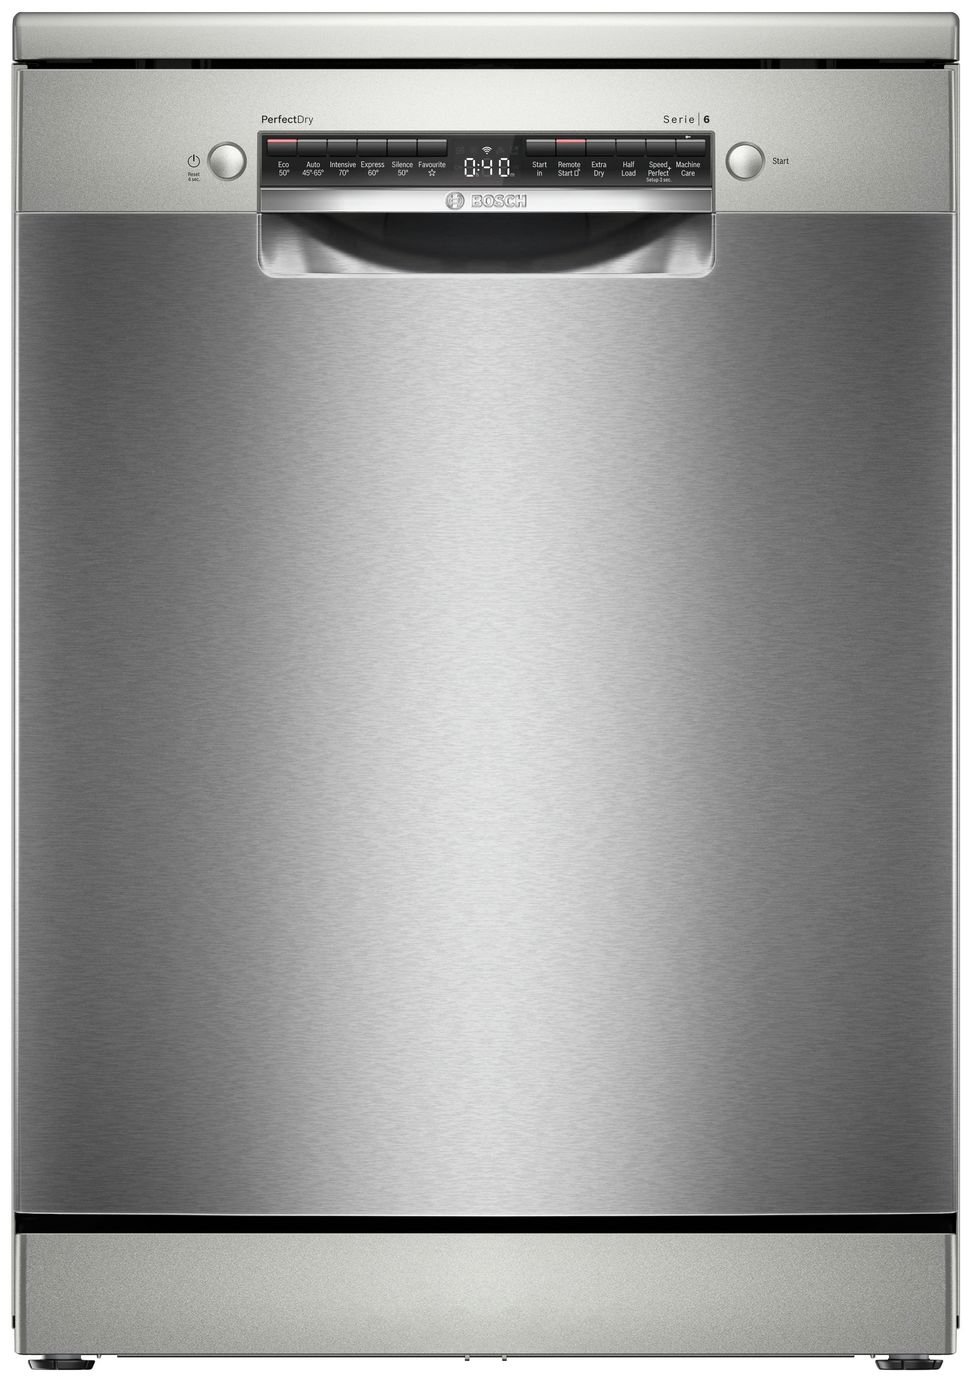 Bosch SMS6ZCI00G Full Size Dishwasher - Stainless Steel